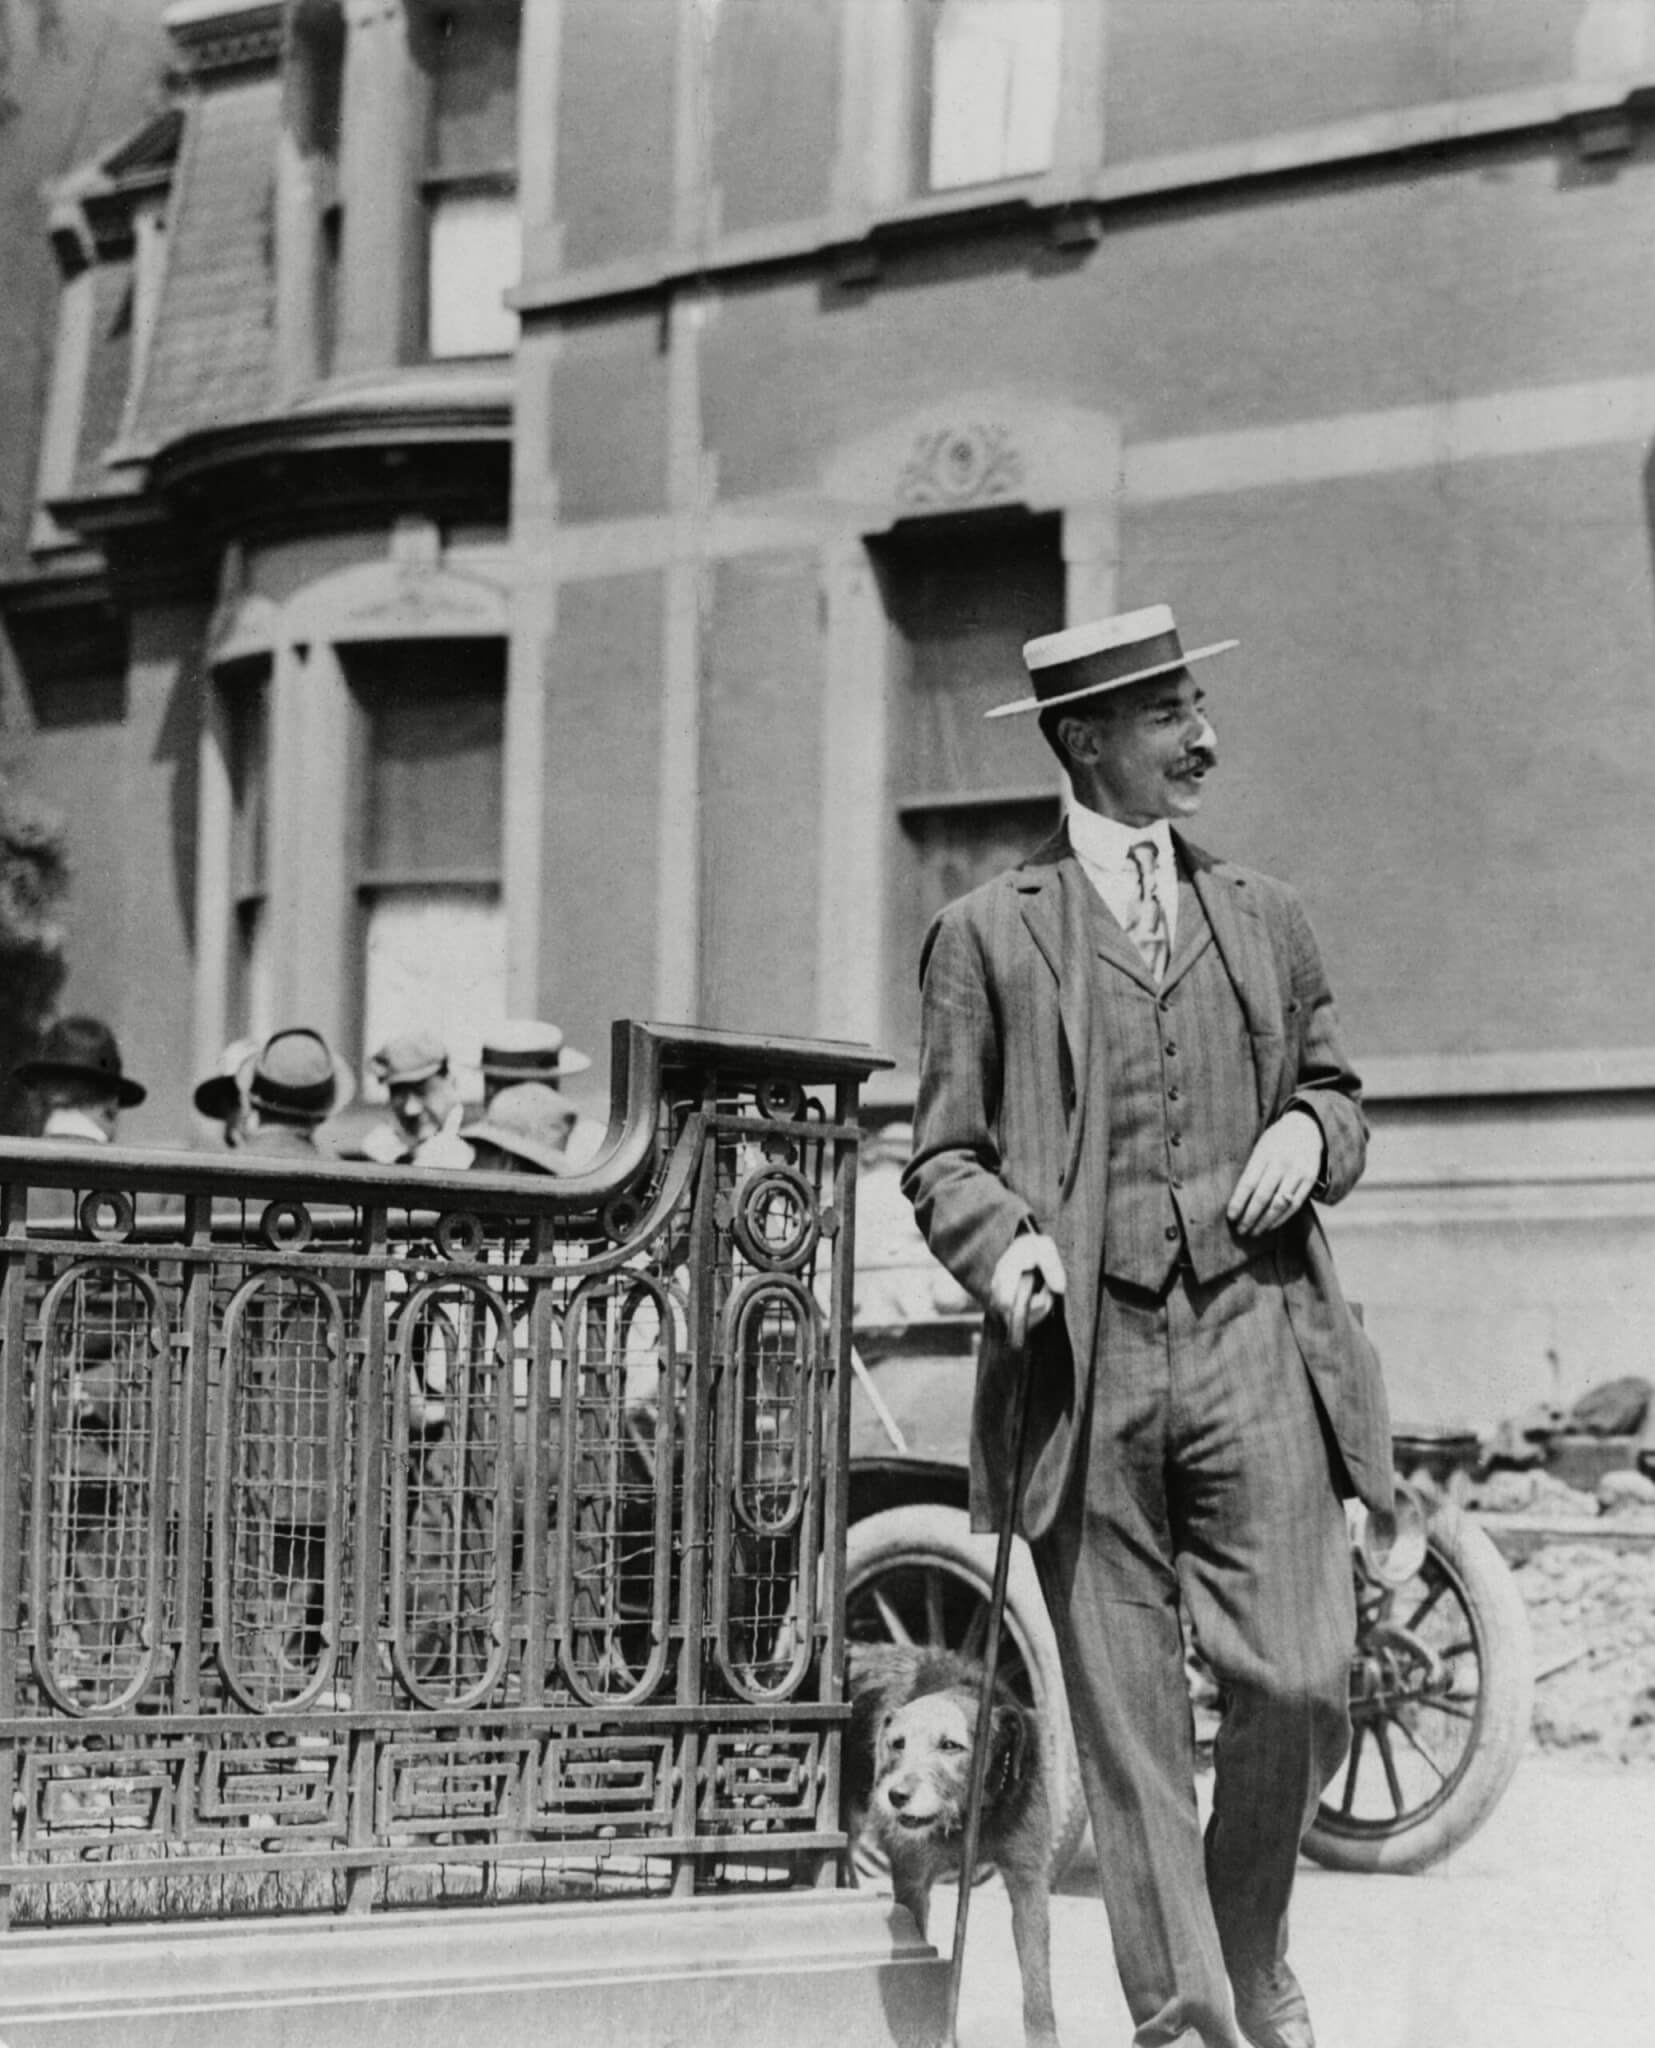 John Jacob Astor IV (1864-1912), walking his dog. He was a talented aristocrat who engaged in business, inventing, writing and reached the rank of lieutenant colonel in the Spanish-American War. He perished on the Titanic in 1912.